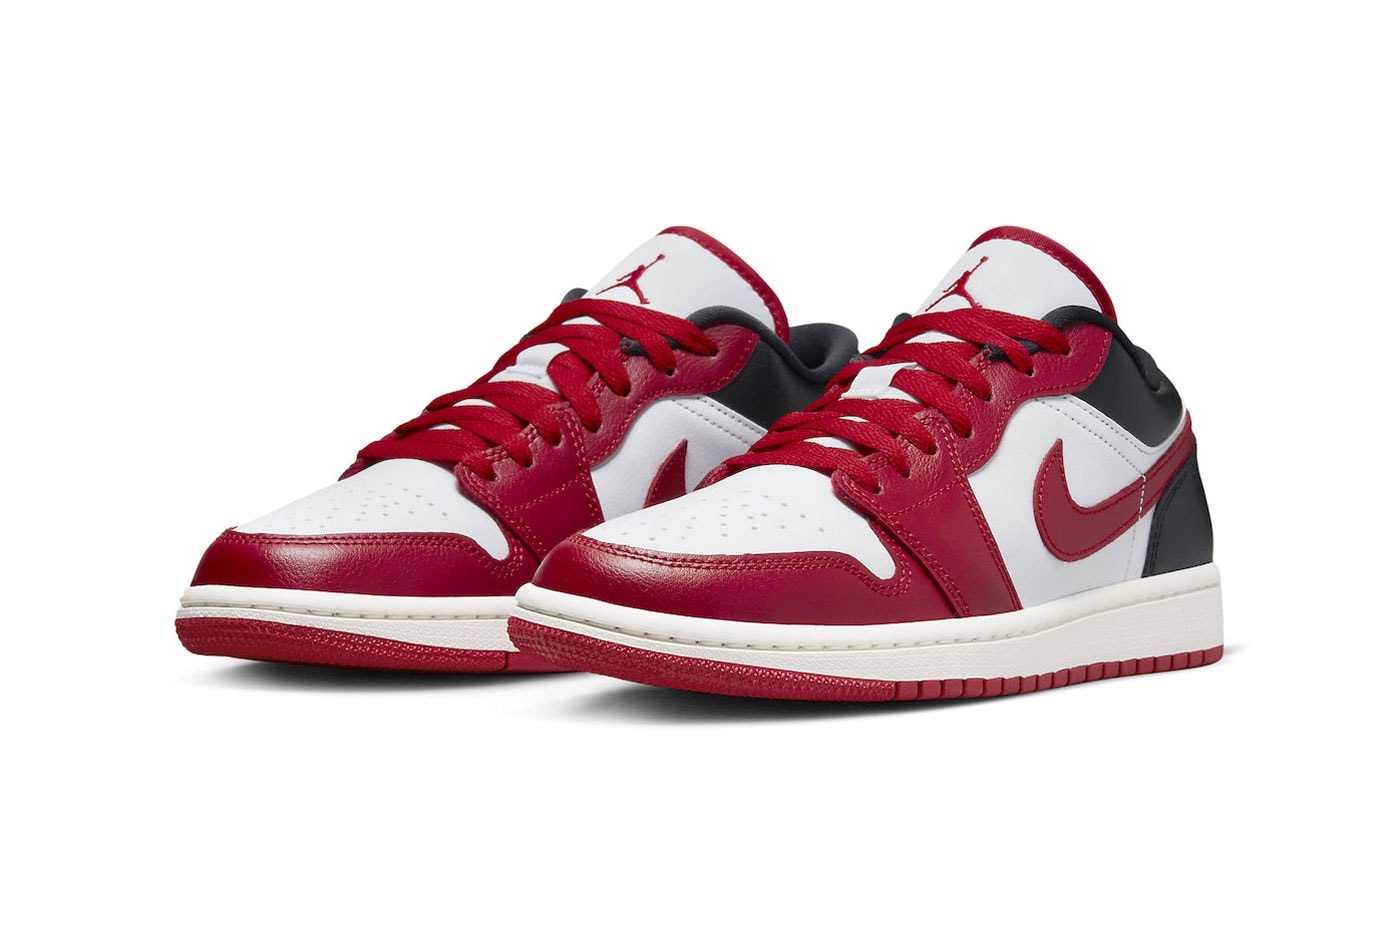 Air Jordan 1 Low Chicago Like Official Look Release Info DC0774-160